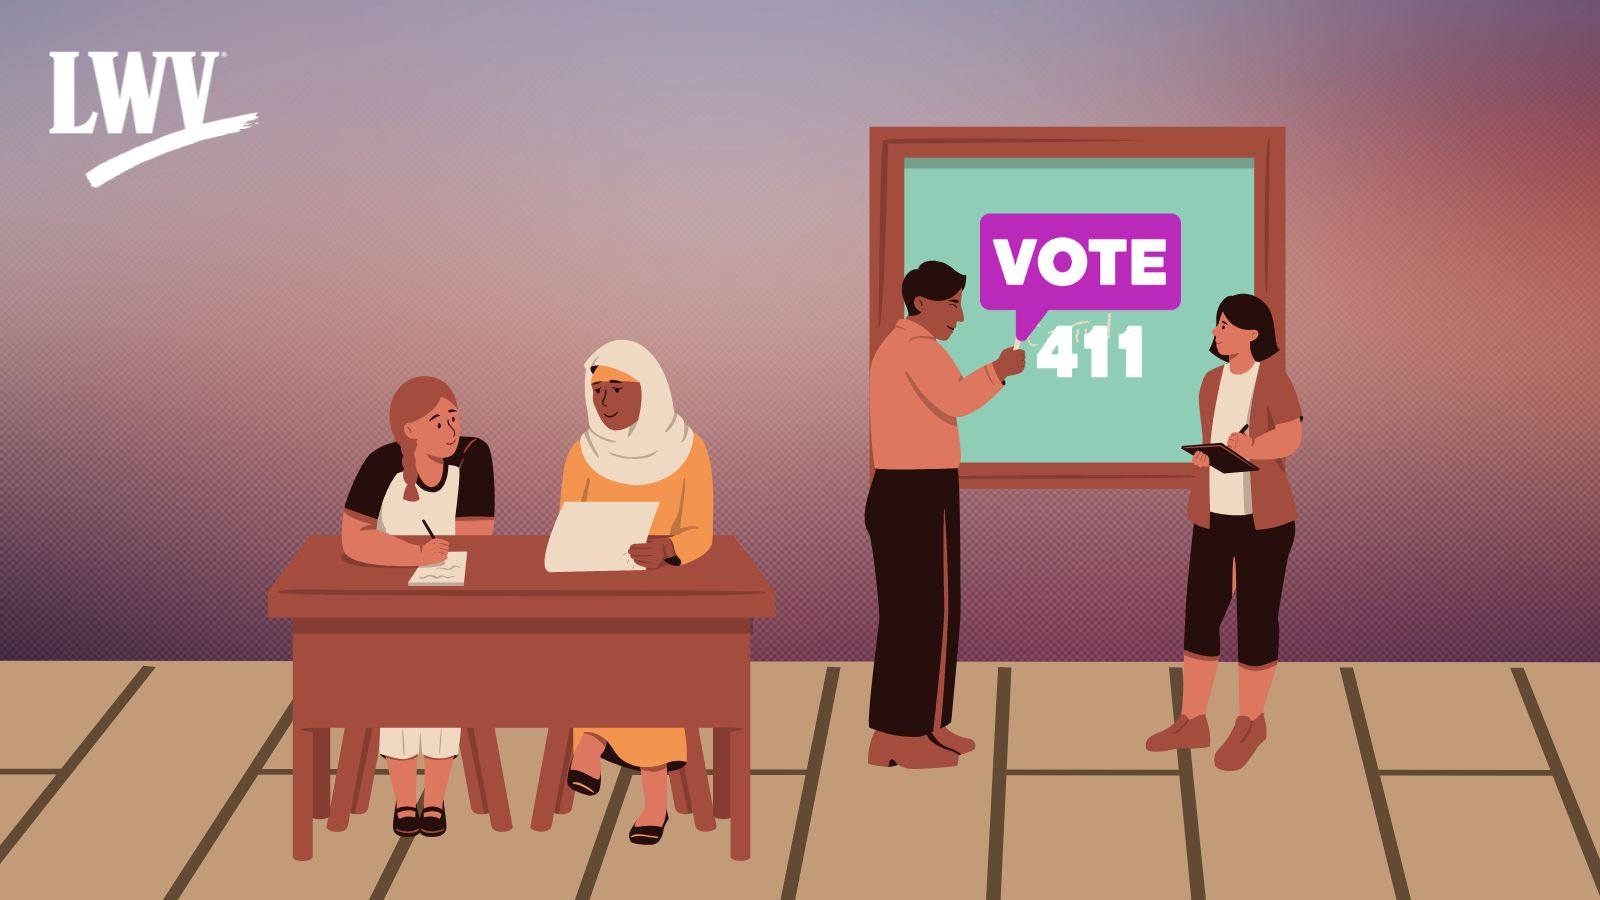 Cartoon of several people in a classroom with a desk and blackboard. The blackboard has a VOTE411 logo.